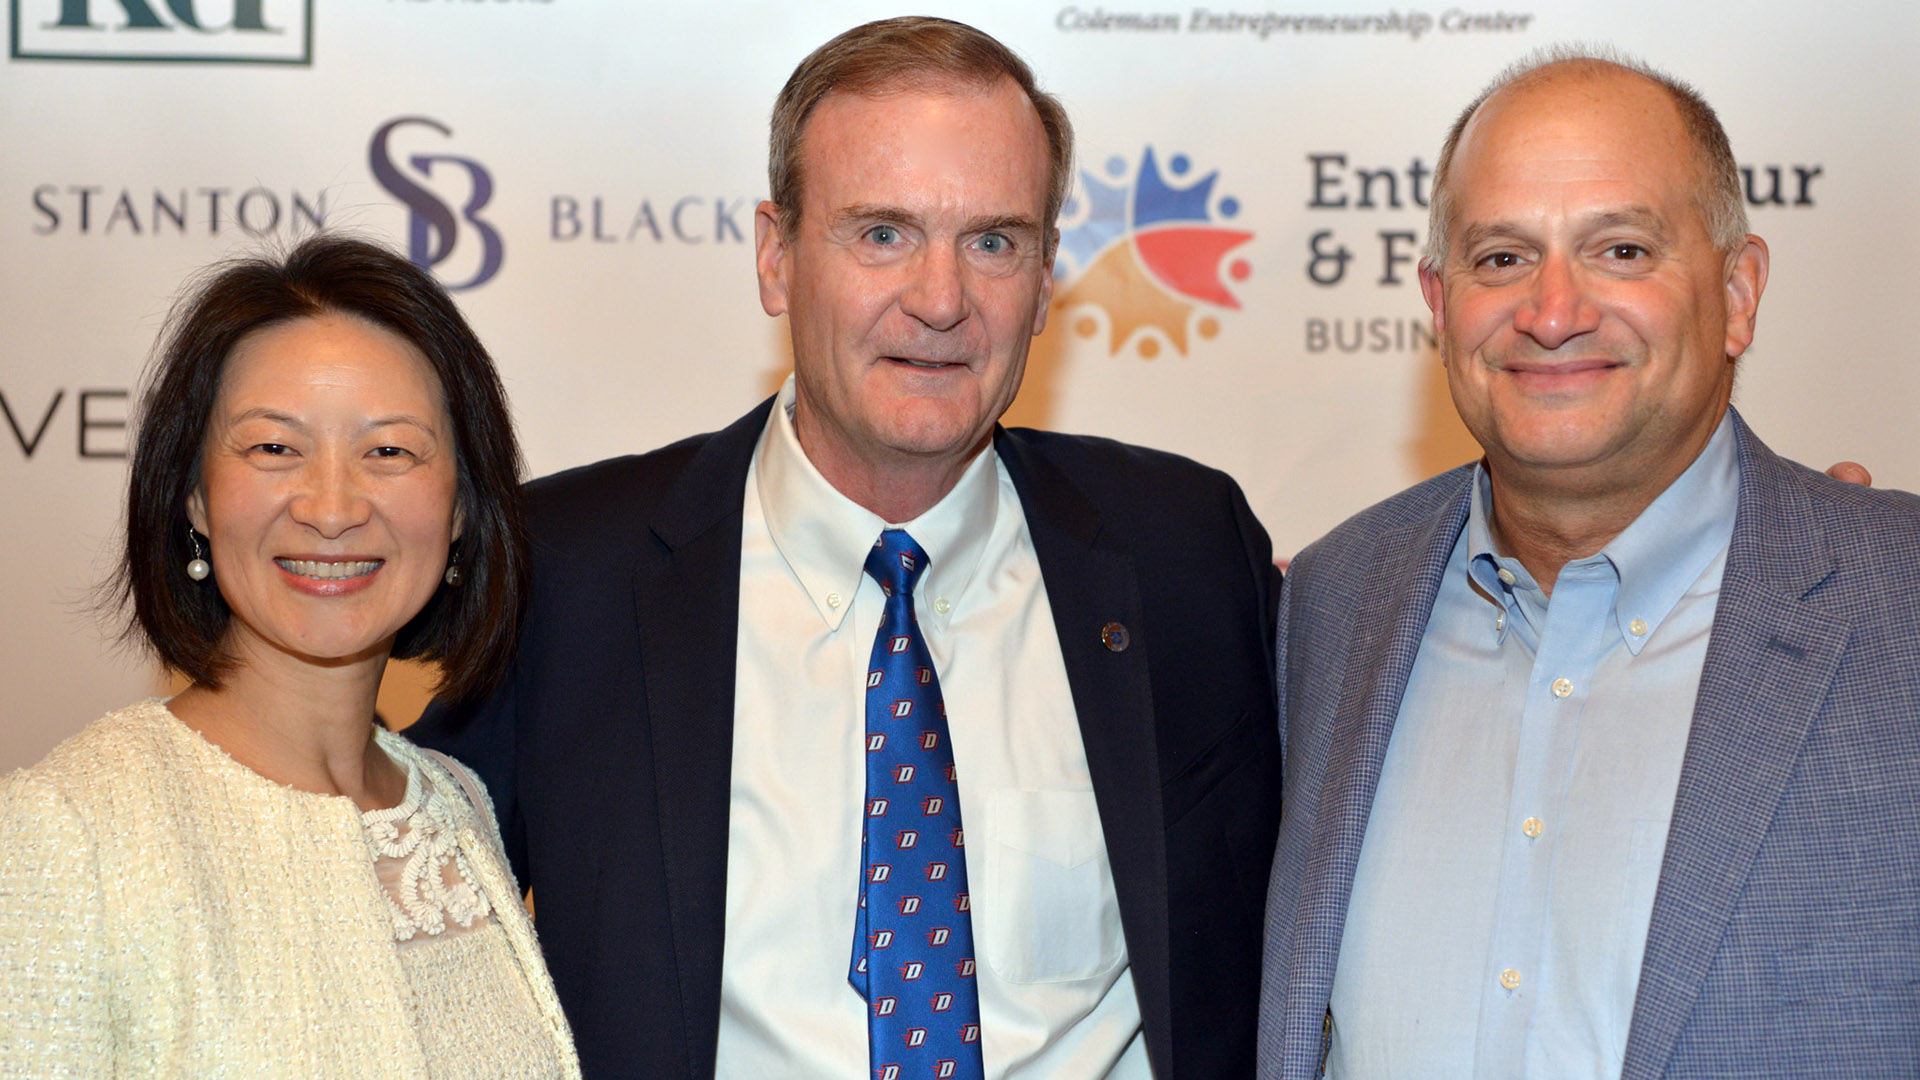 From left to right: Ba, Leech, and Director of DePaul’s Sports Management Program Andy Clark.